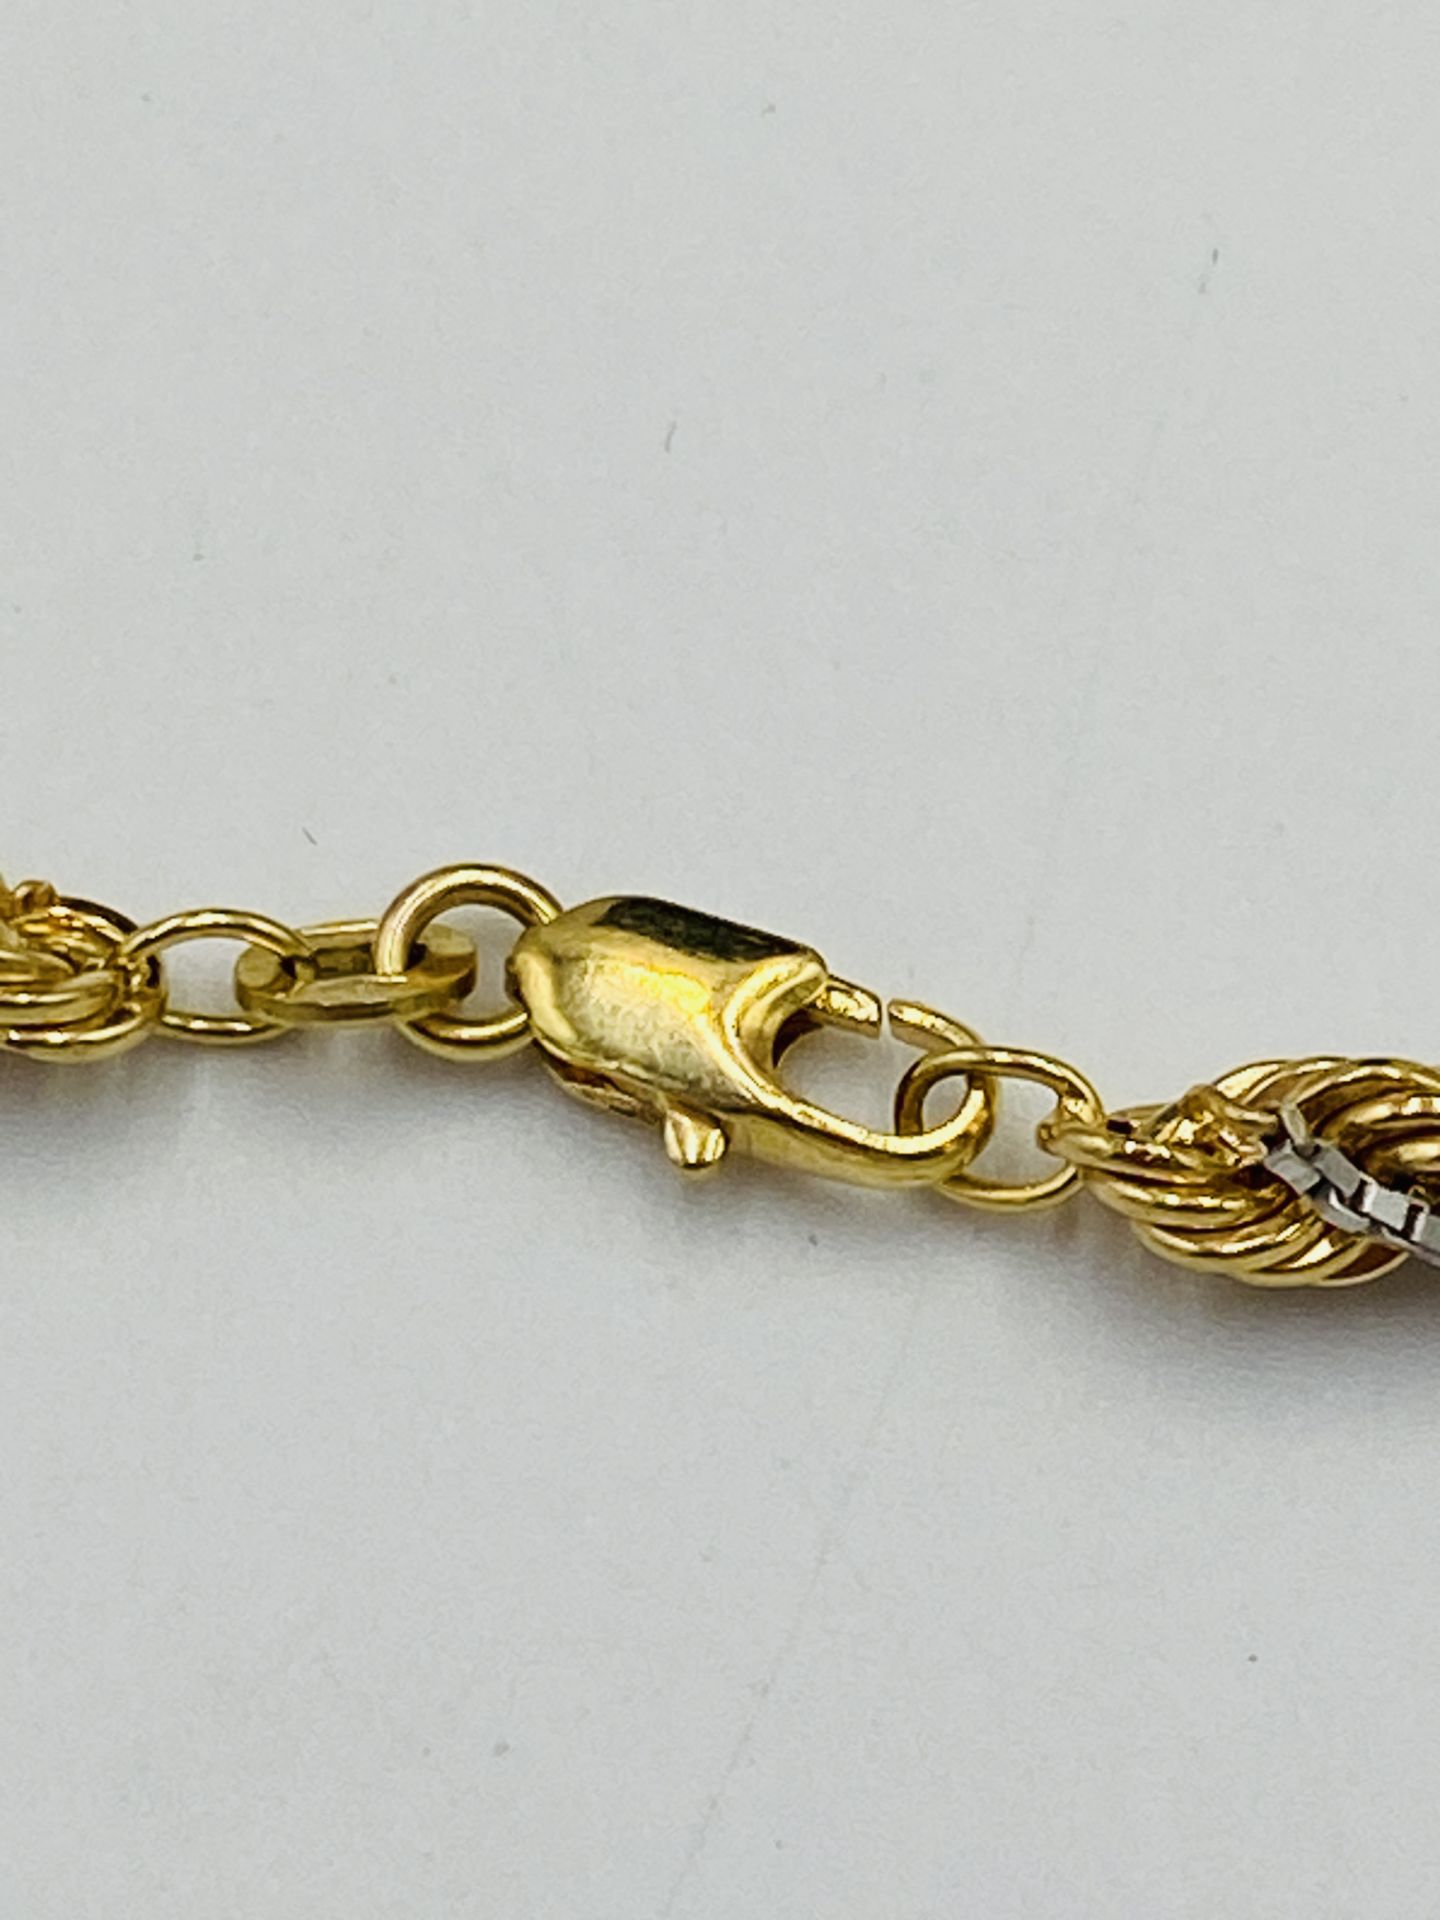 9ct gold and white metal rope twist necklace - Image 3 of 4